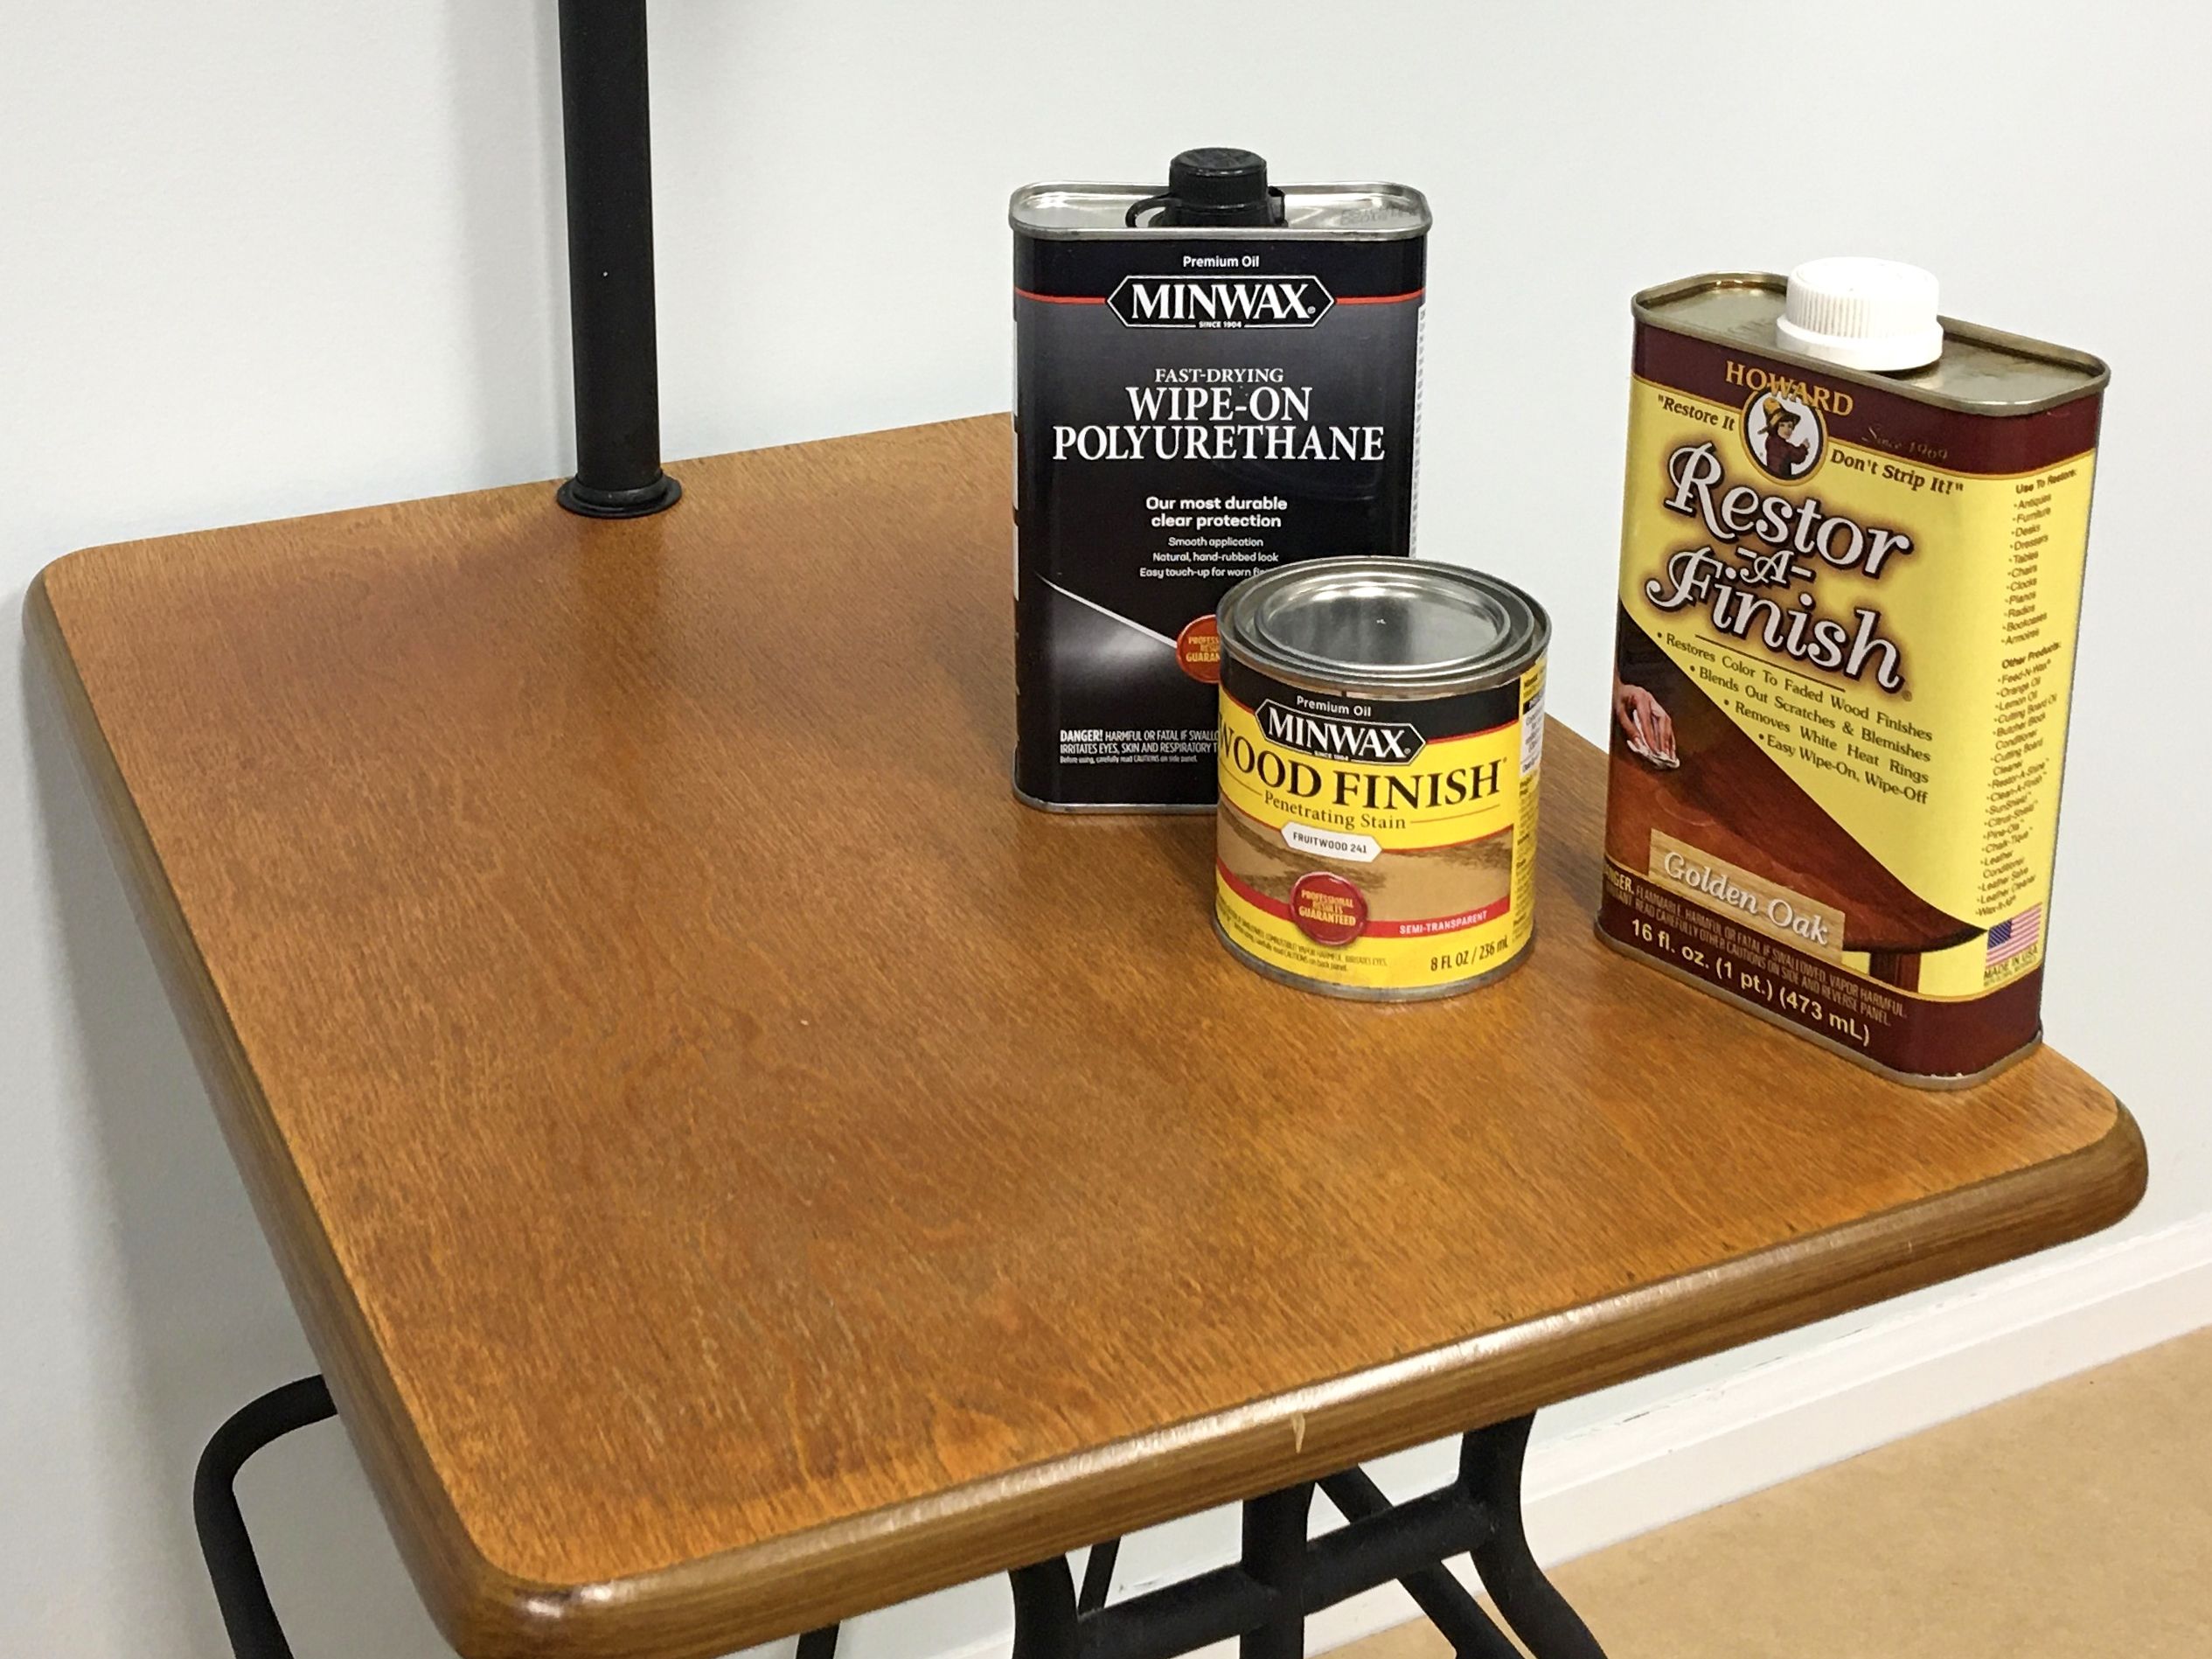 DIY Project: Restoring Wood With Howard's Restor-A-Finish in Minutes